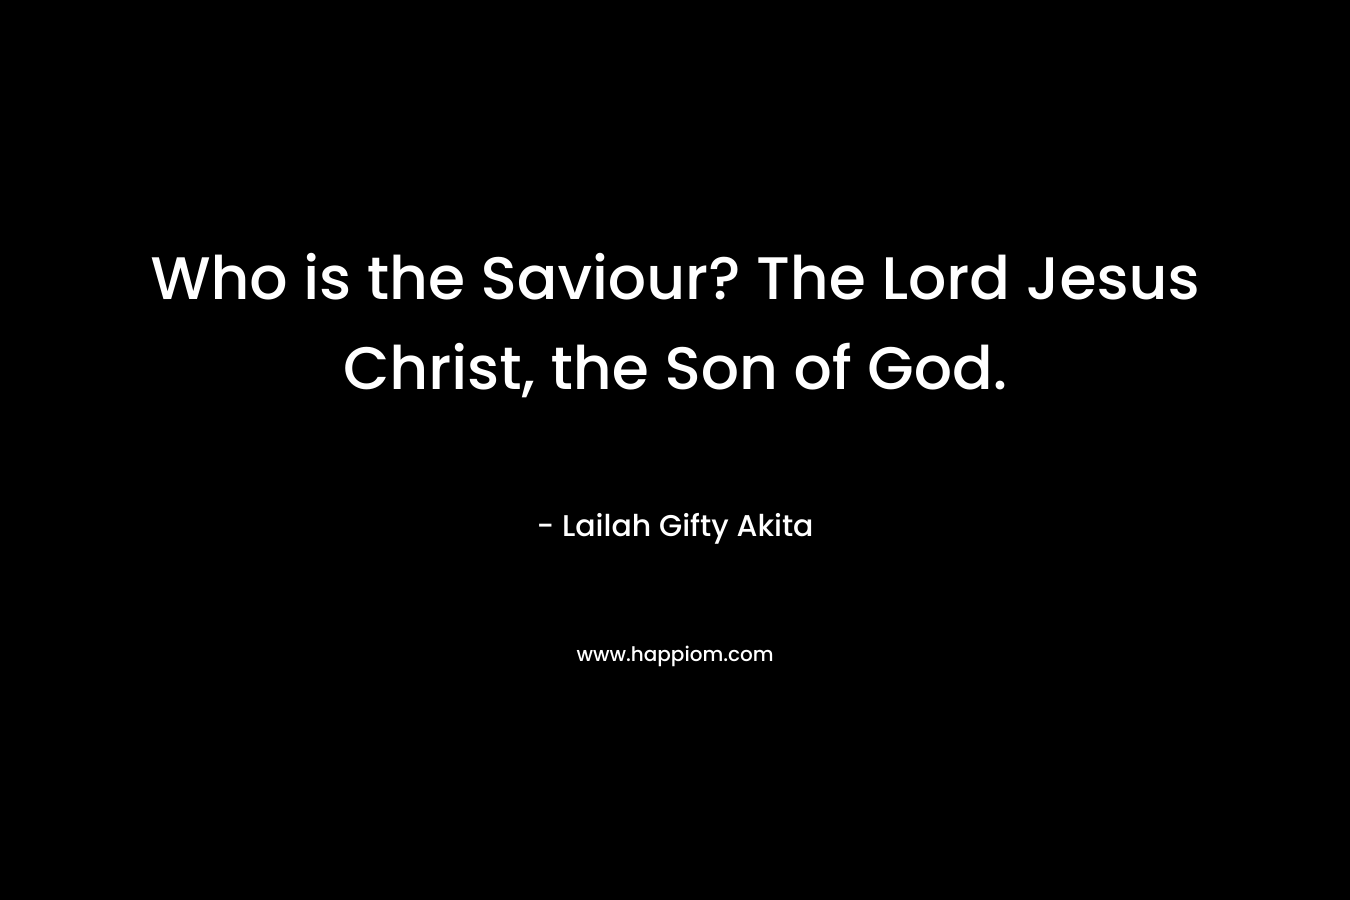 Who is the Saviour? The Lord Jesus Christ, the Son of God.